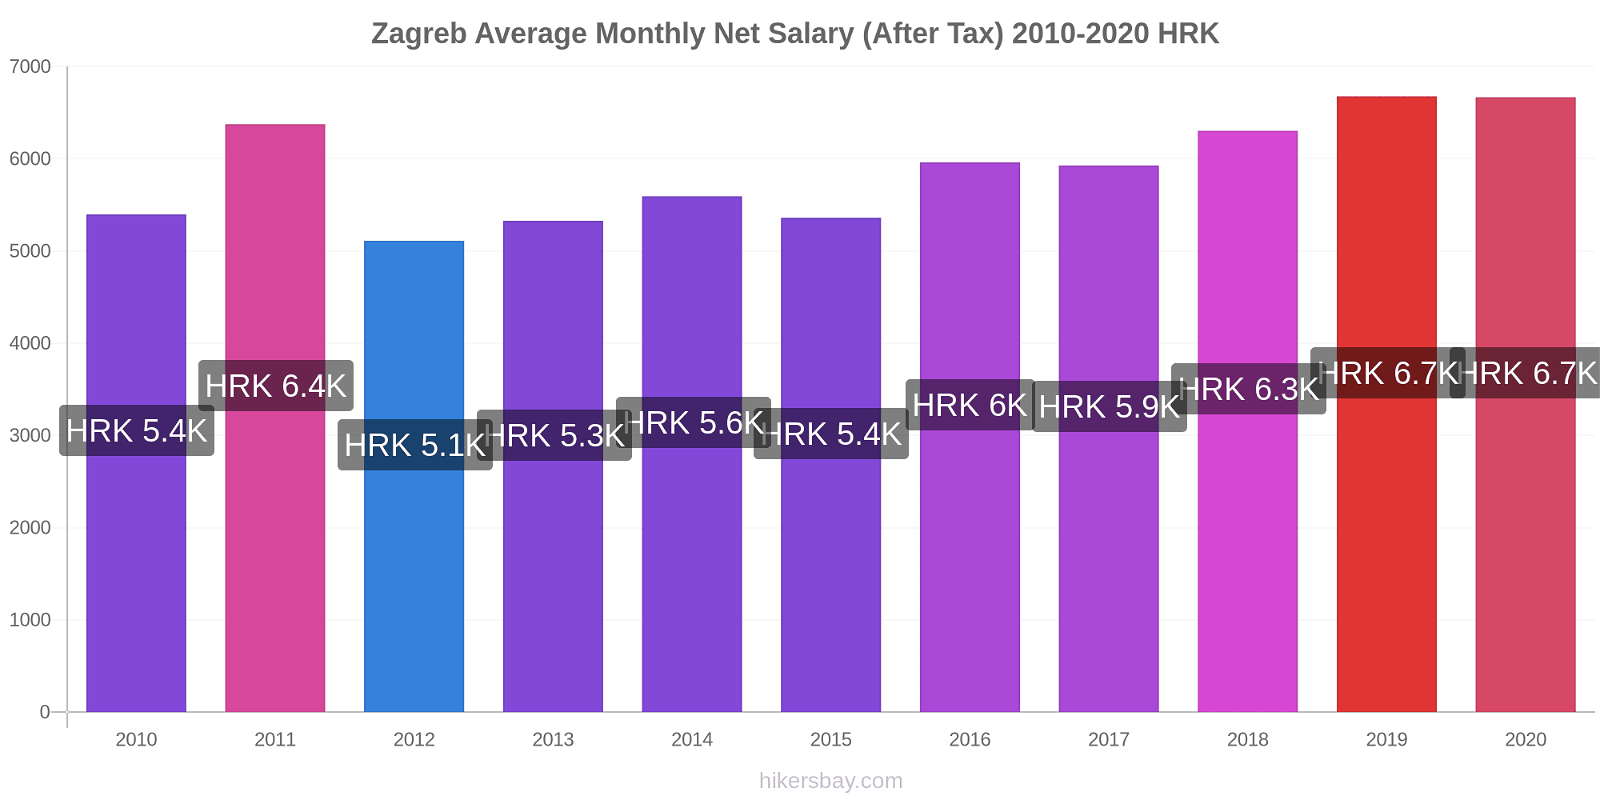 Zagreb price changes Average Monthly Net Salary (After Tax) hikersbay.com